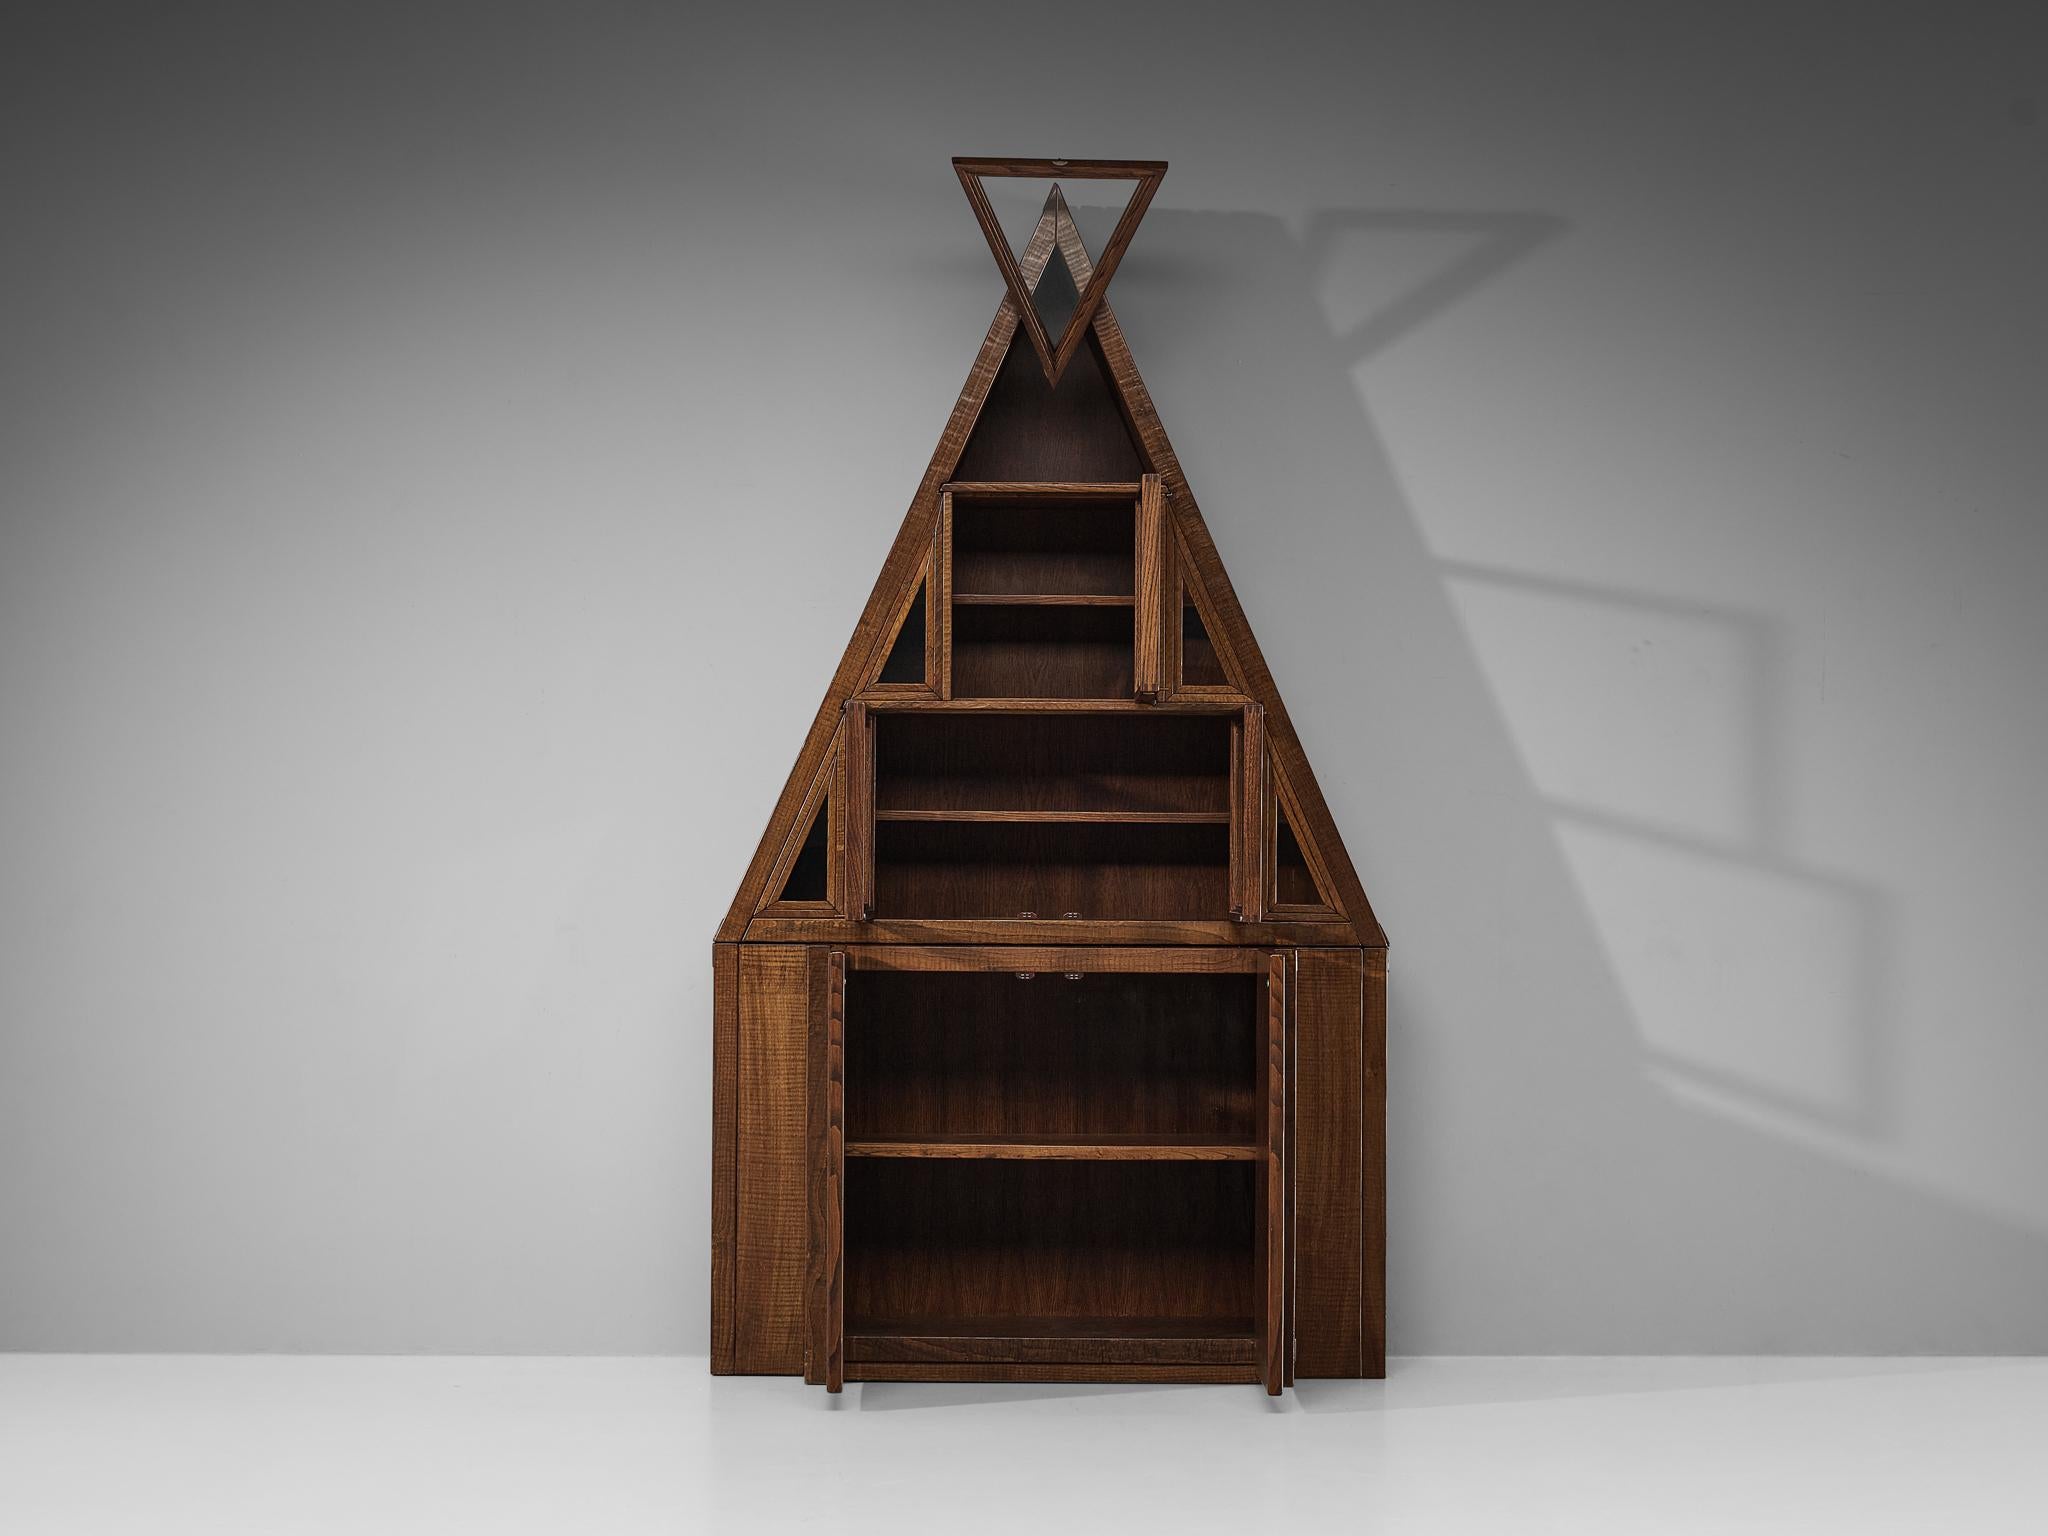 Giuseppe Rivadossi Pyramid Shaped Cabinet in Chestnut 8.2 feet  For Sale 8